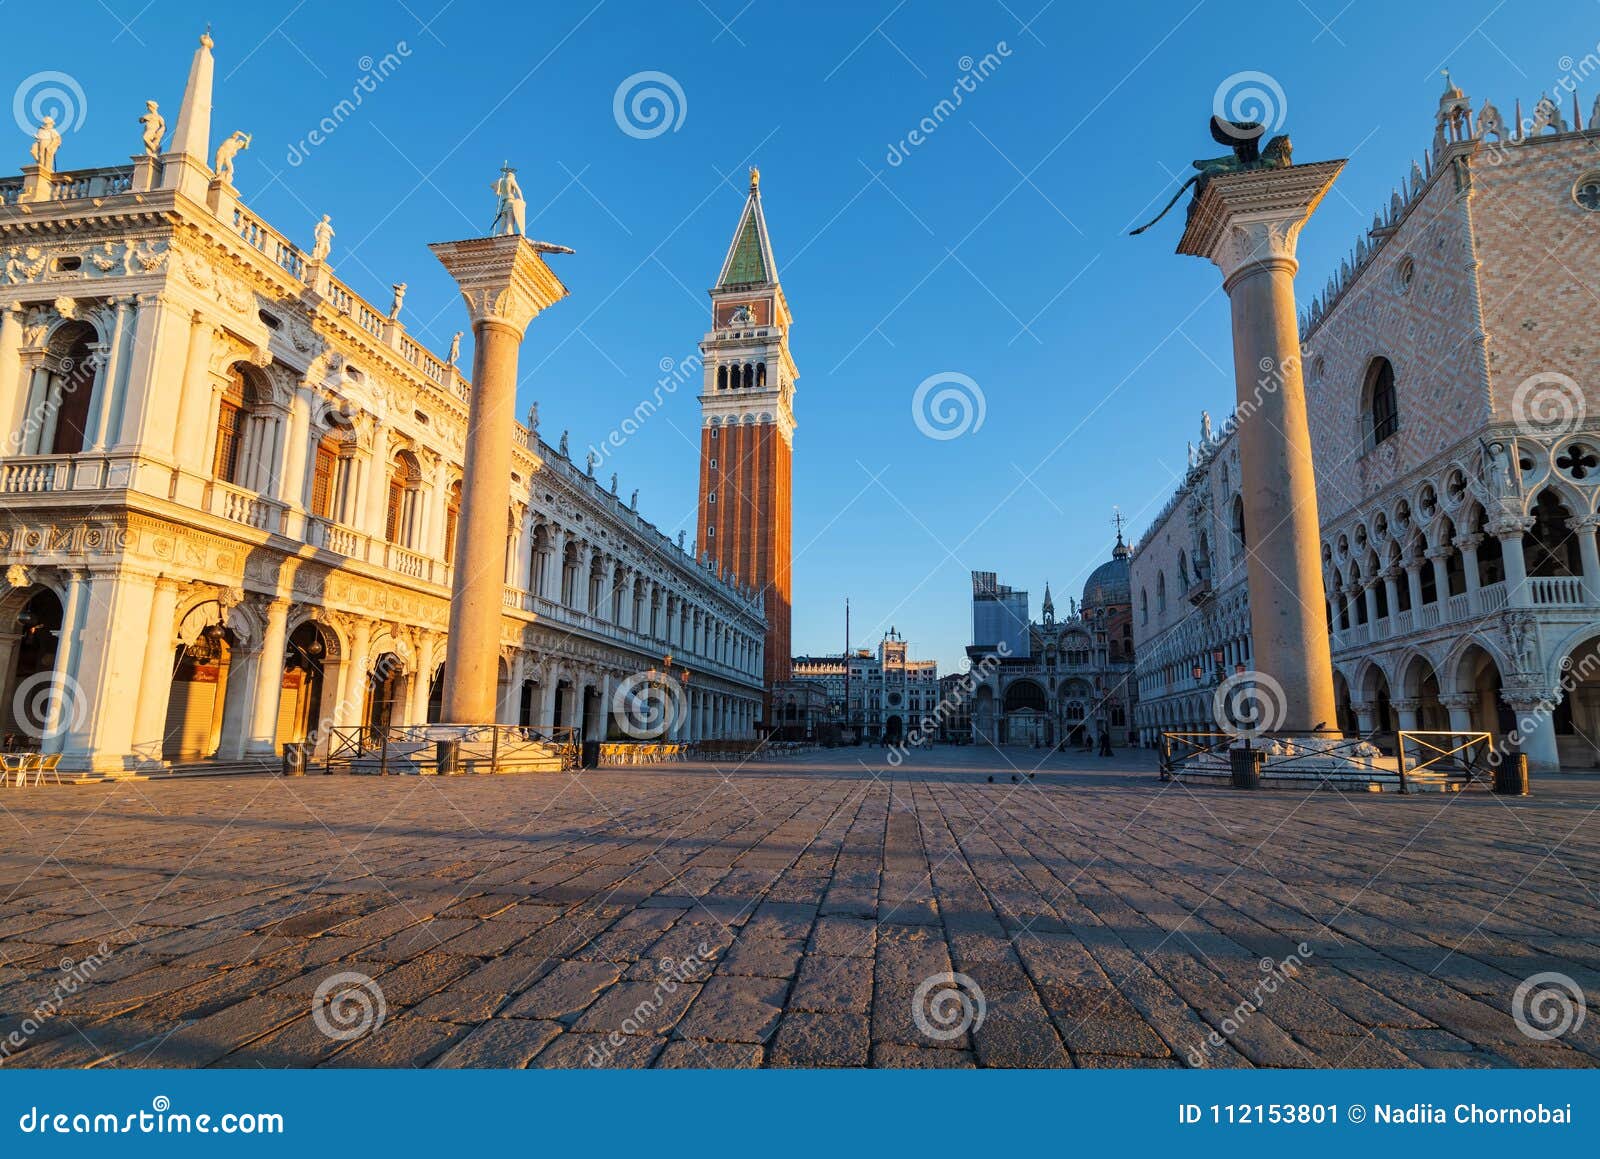 Early Morning In San Marco Square Venice Italy Stock